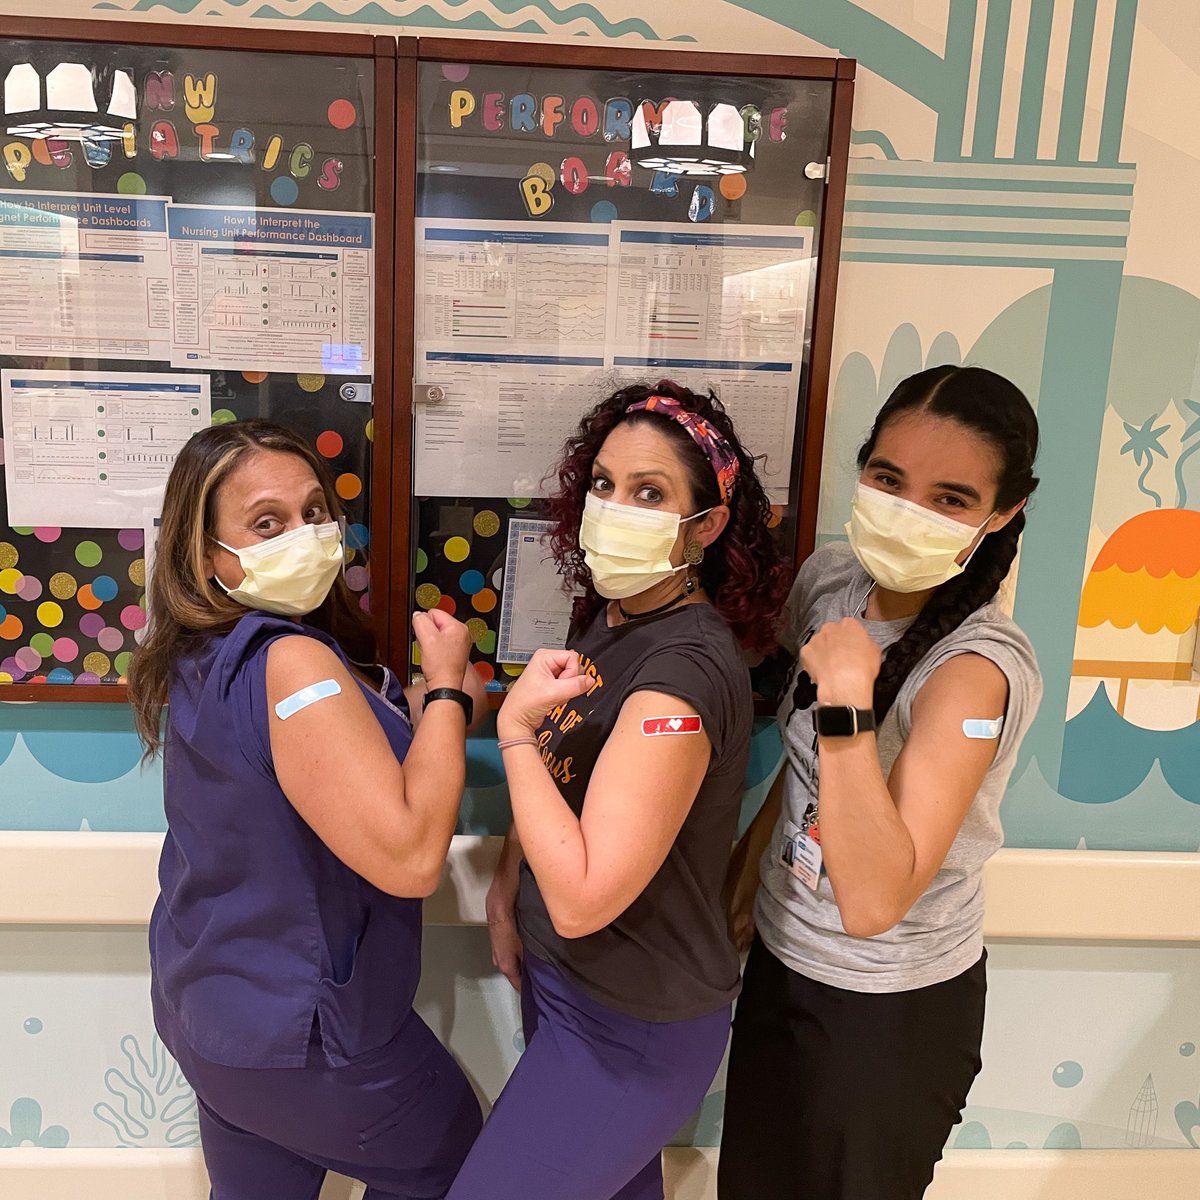 Laila, Clarissa, & Francisca at Santa Monica Child Life remind us it's time to get your #flushot! Vaccination against influenza reduces the likelihood of the need for doctor visits related to the virus by 40% to 60%, according to the @CDCgov. Read more: ucla.in/3Fk4nAa